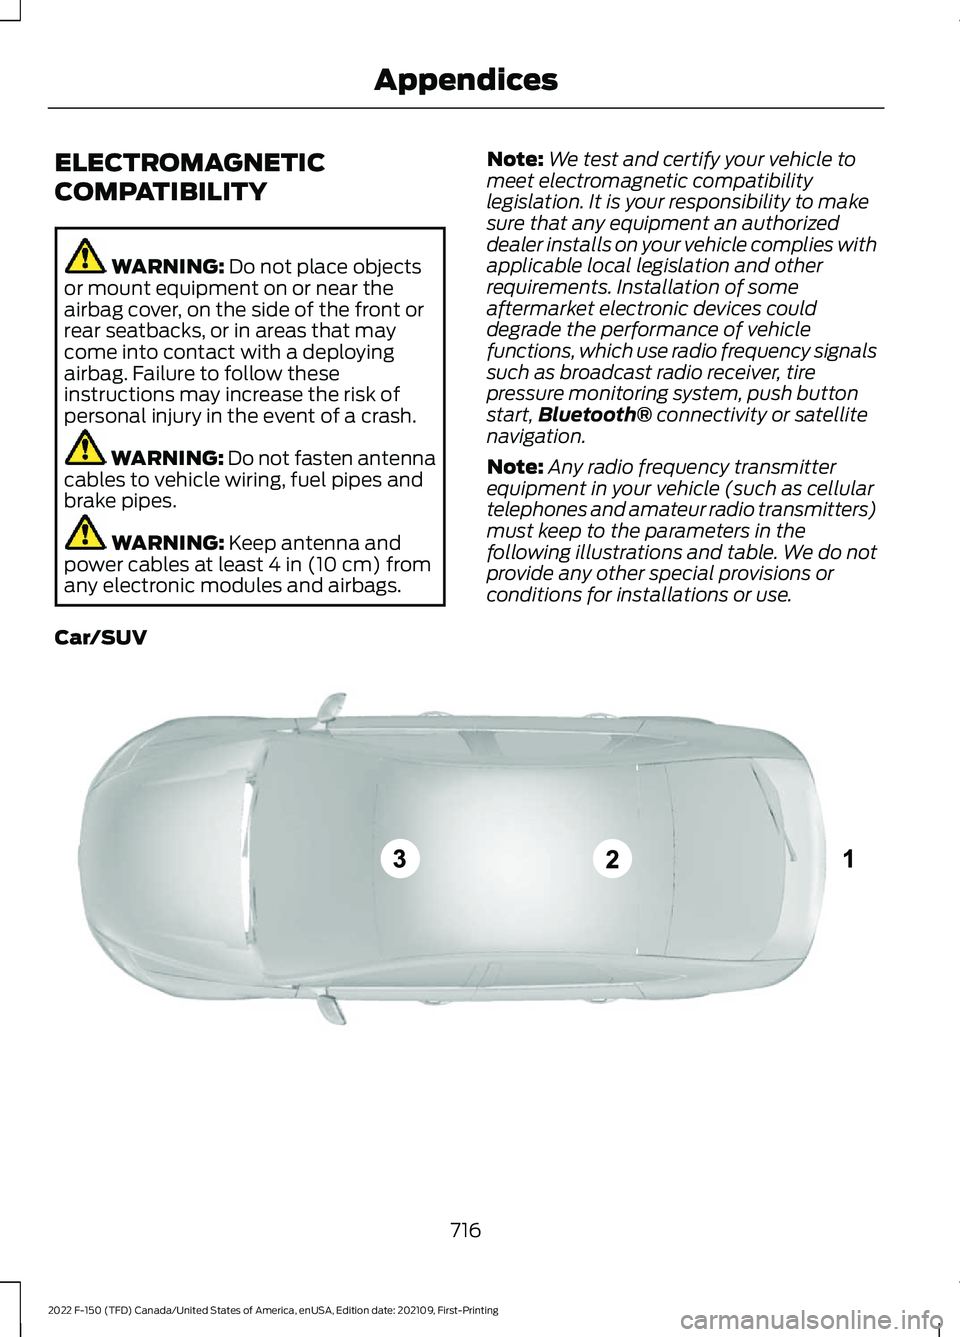 FORD F-150 2022 Owners Guide ELECTROMAGNETIC
COMPATIBILITY
WARNING: Do not place objects
or mount equipment on or near the
airbag cover, on the side of the front or
rear seatbacks, or in areas that may
come into contact with a de